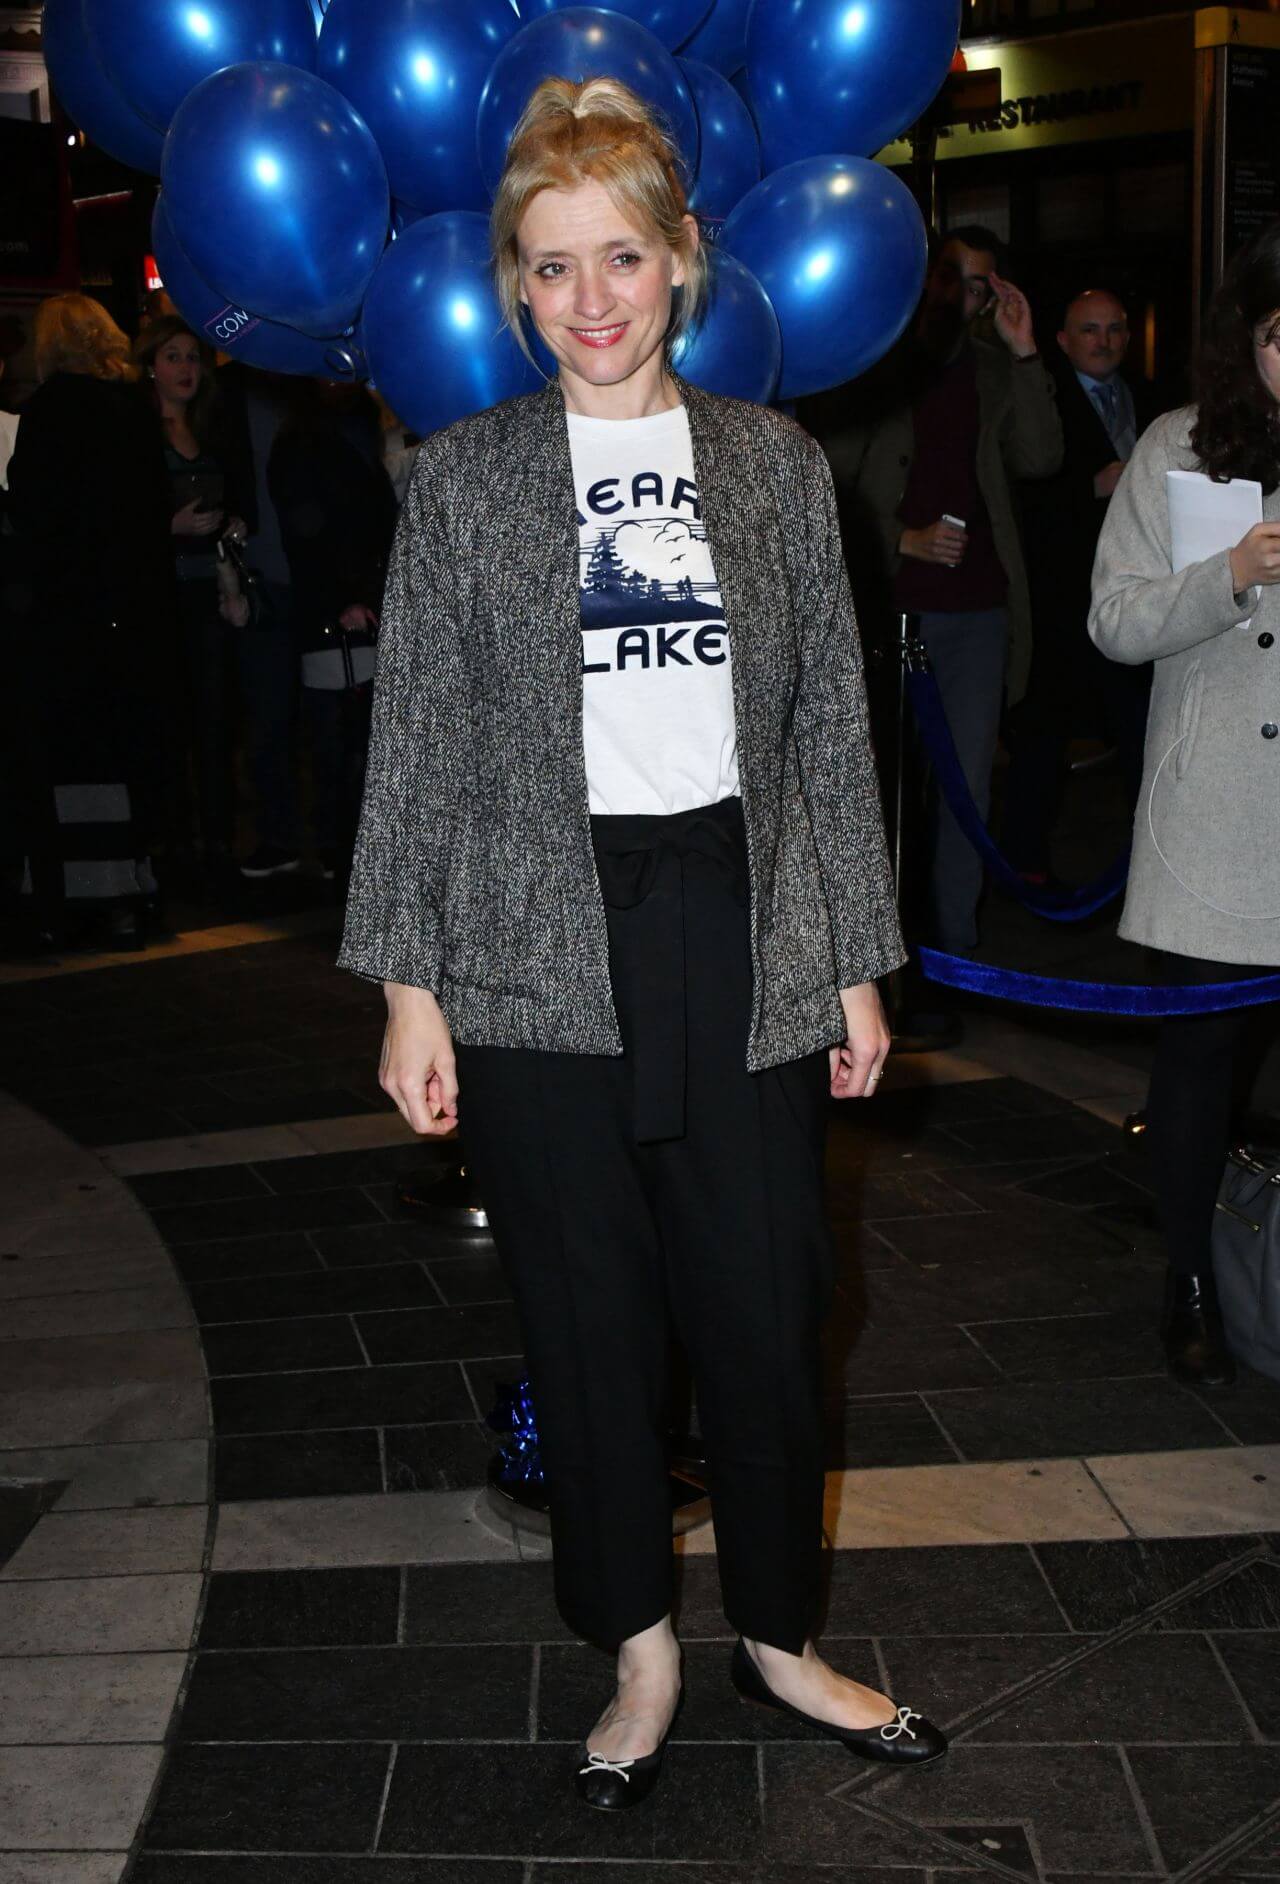 Anne-Marie Duff In White T-Shirt & Black Pants With Grey Jacket At “Company” Party Press Night in London